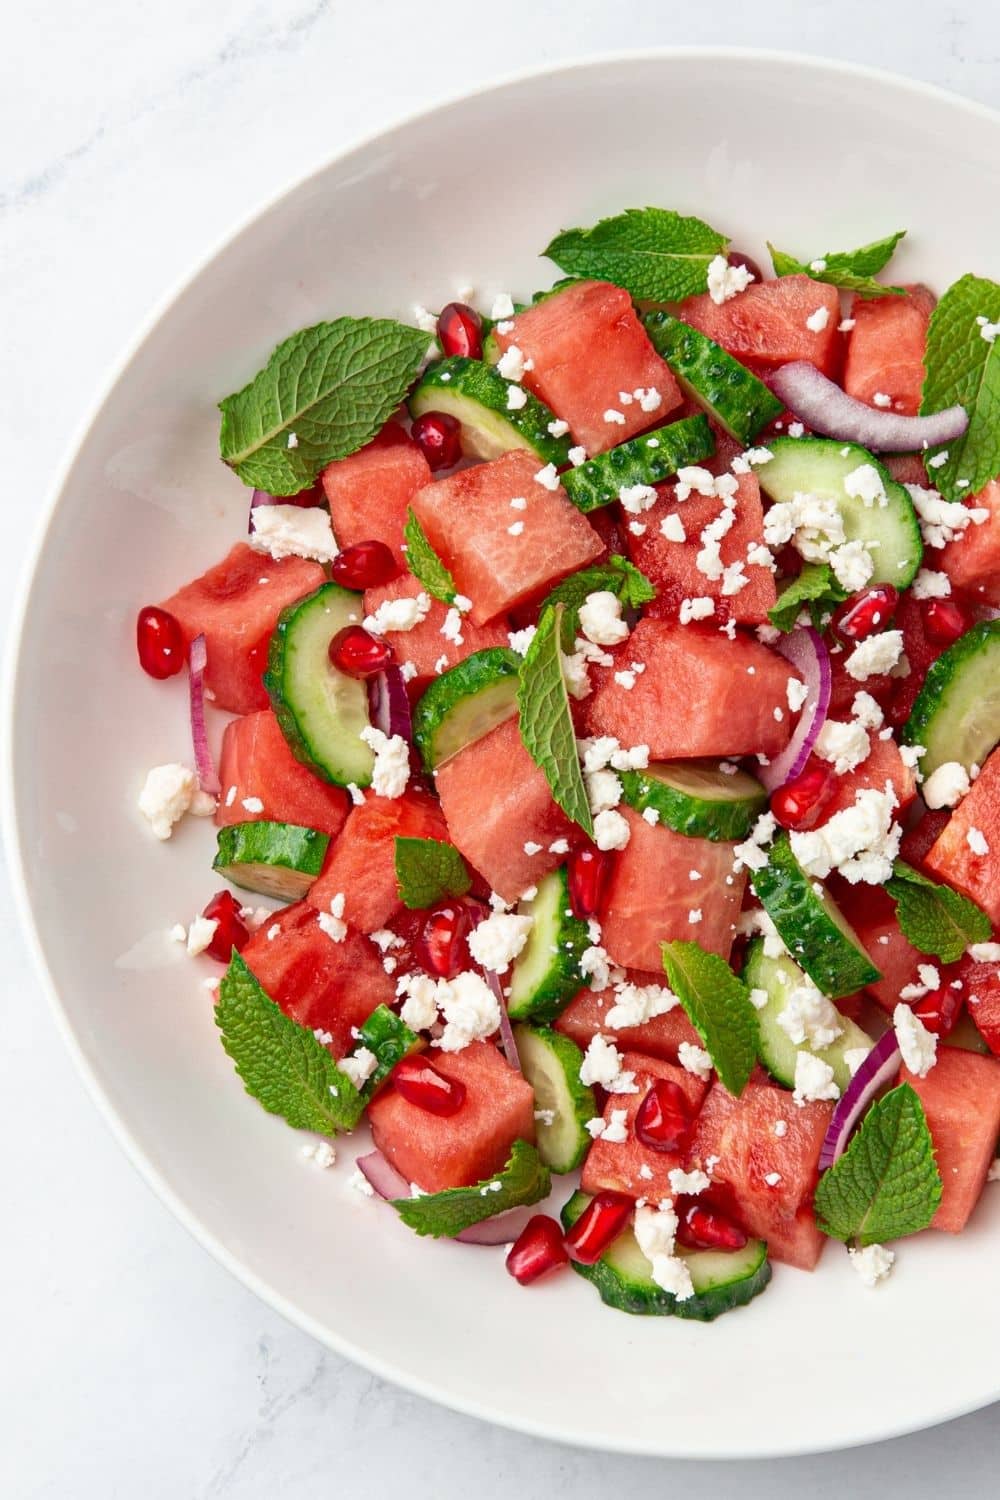 watermelon feta salad with cucumber, mint leaves and pomegranate seeds